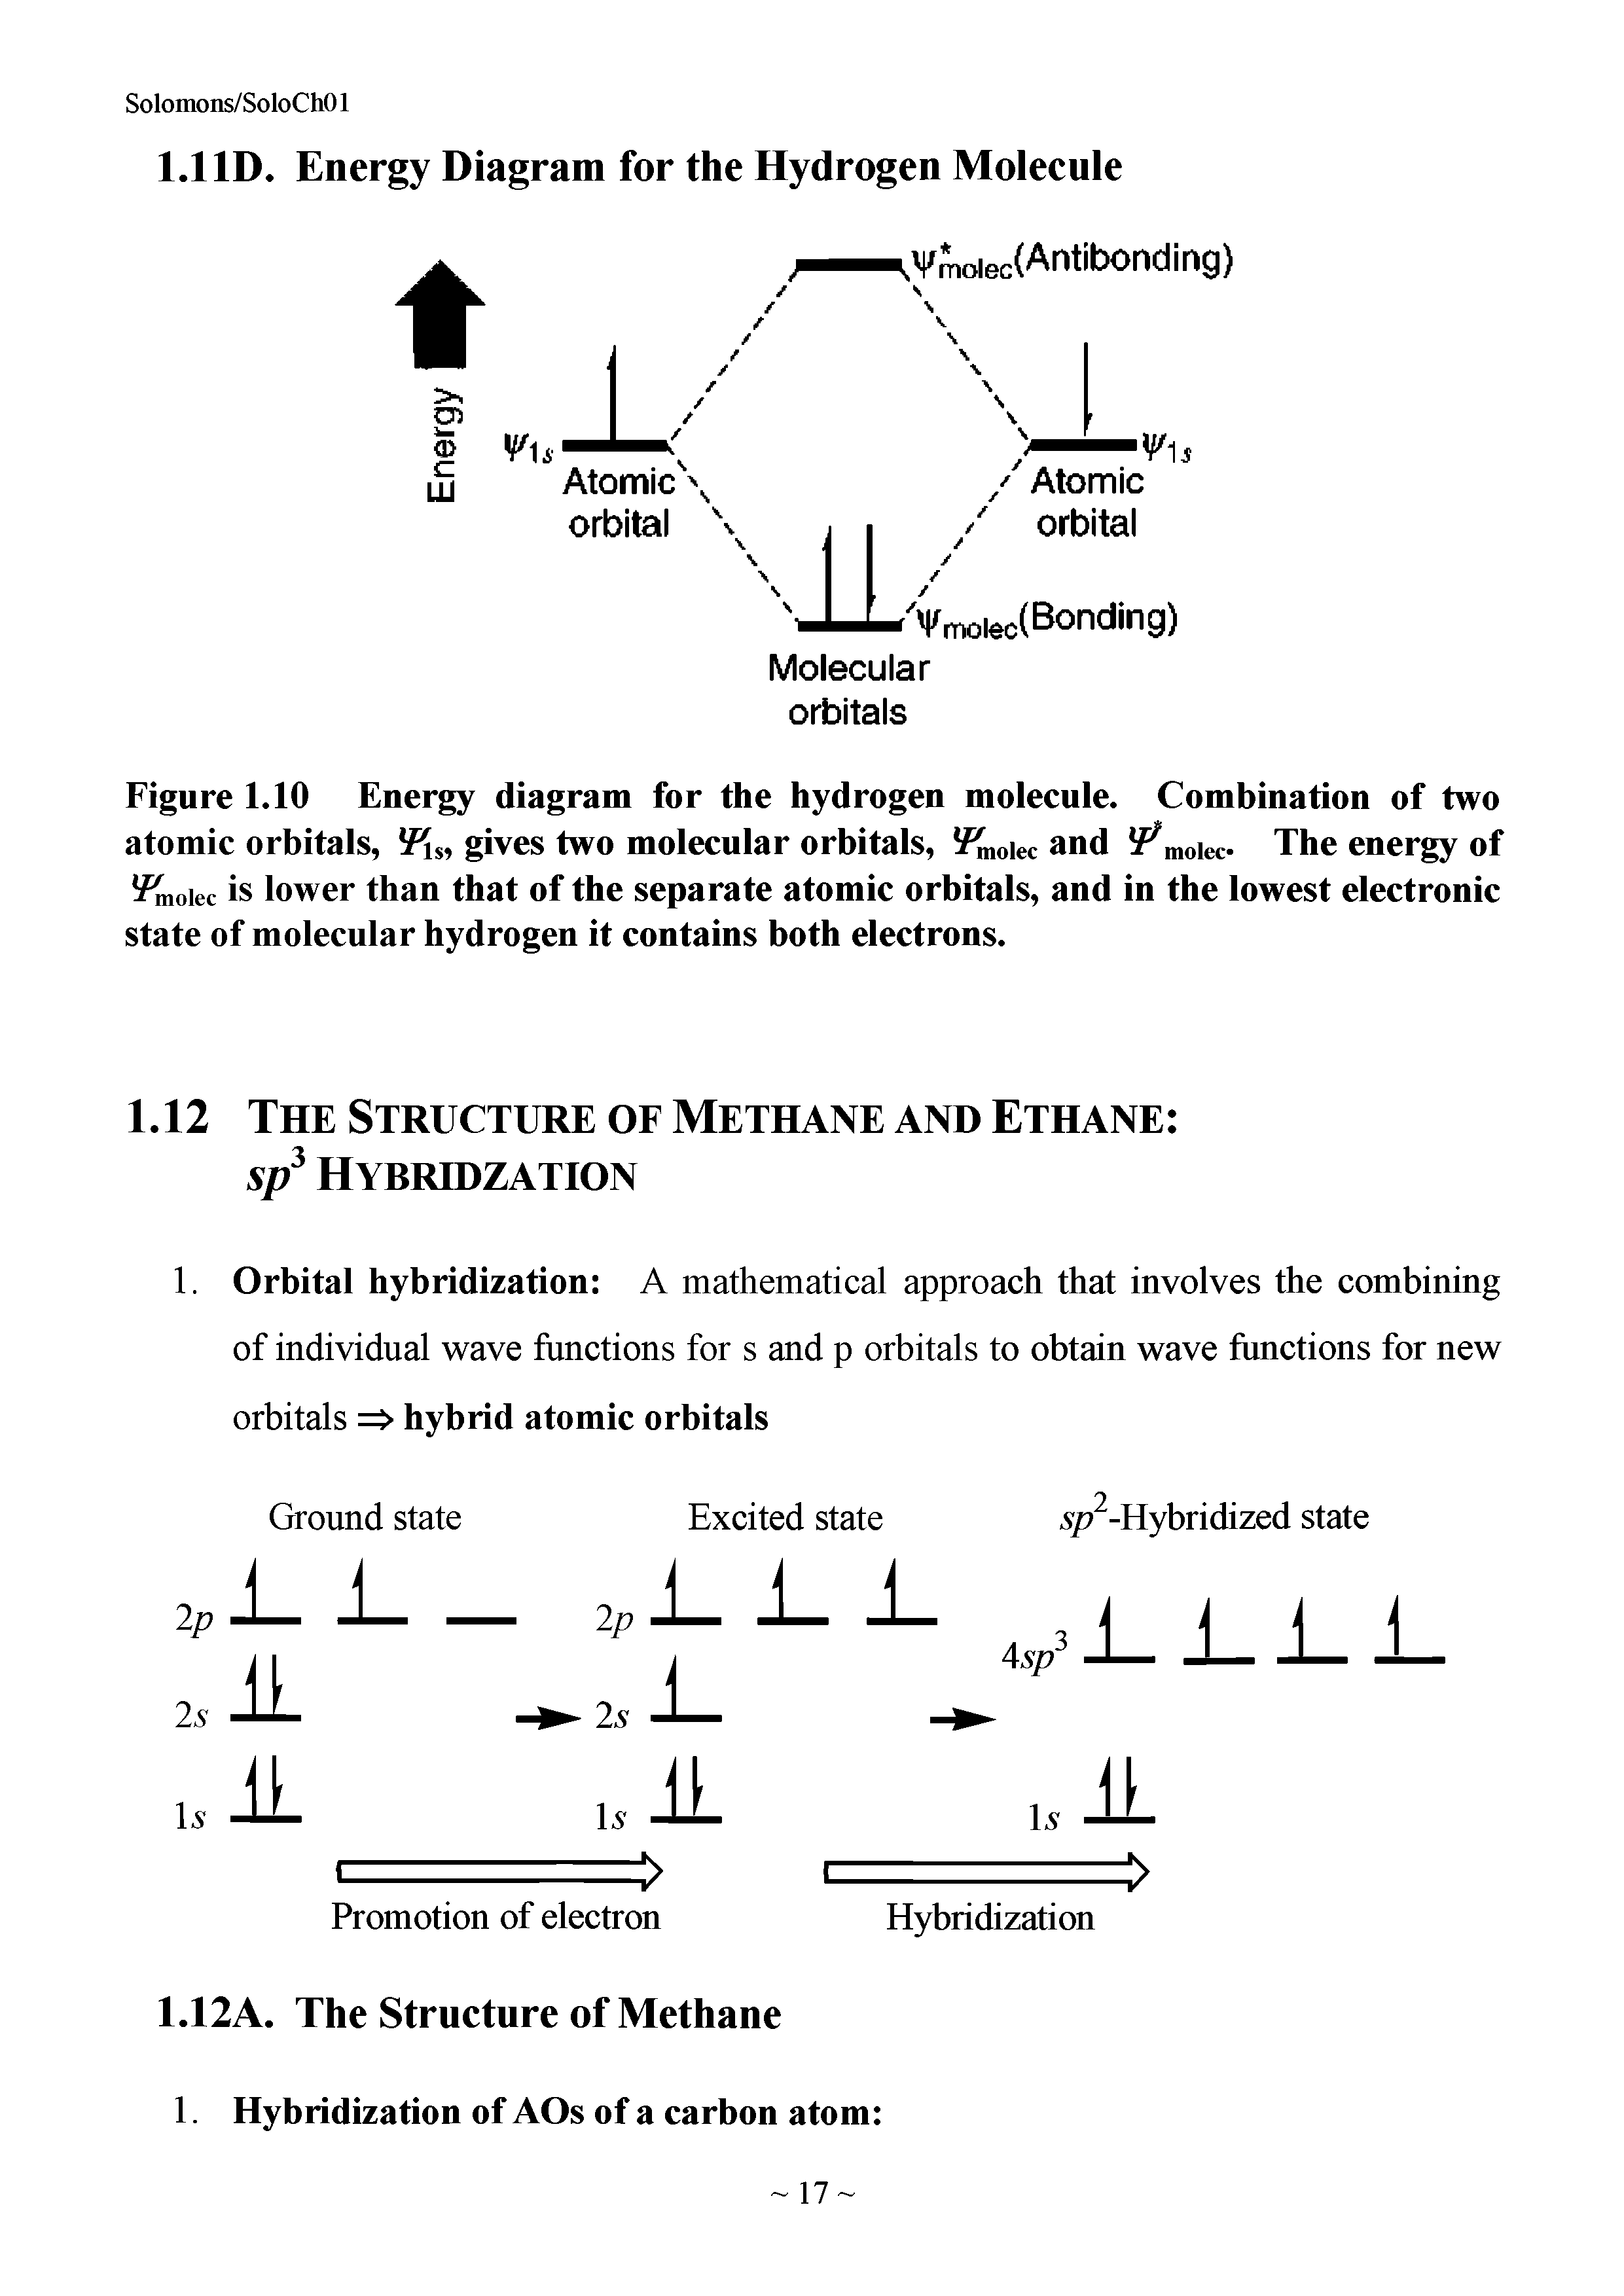 Figure 1.10 Energy diagram for the hydrogen molecule. Combination of two atomic orbitals, is, gives two molecular orbitals, 0iec and iF moiec- The energy of Iffnoiec is lower than that of the separate atomic orbitals, and in the lowest electronic state of molecular hydrogen it contains both electrons.